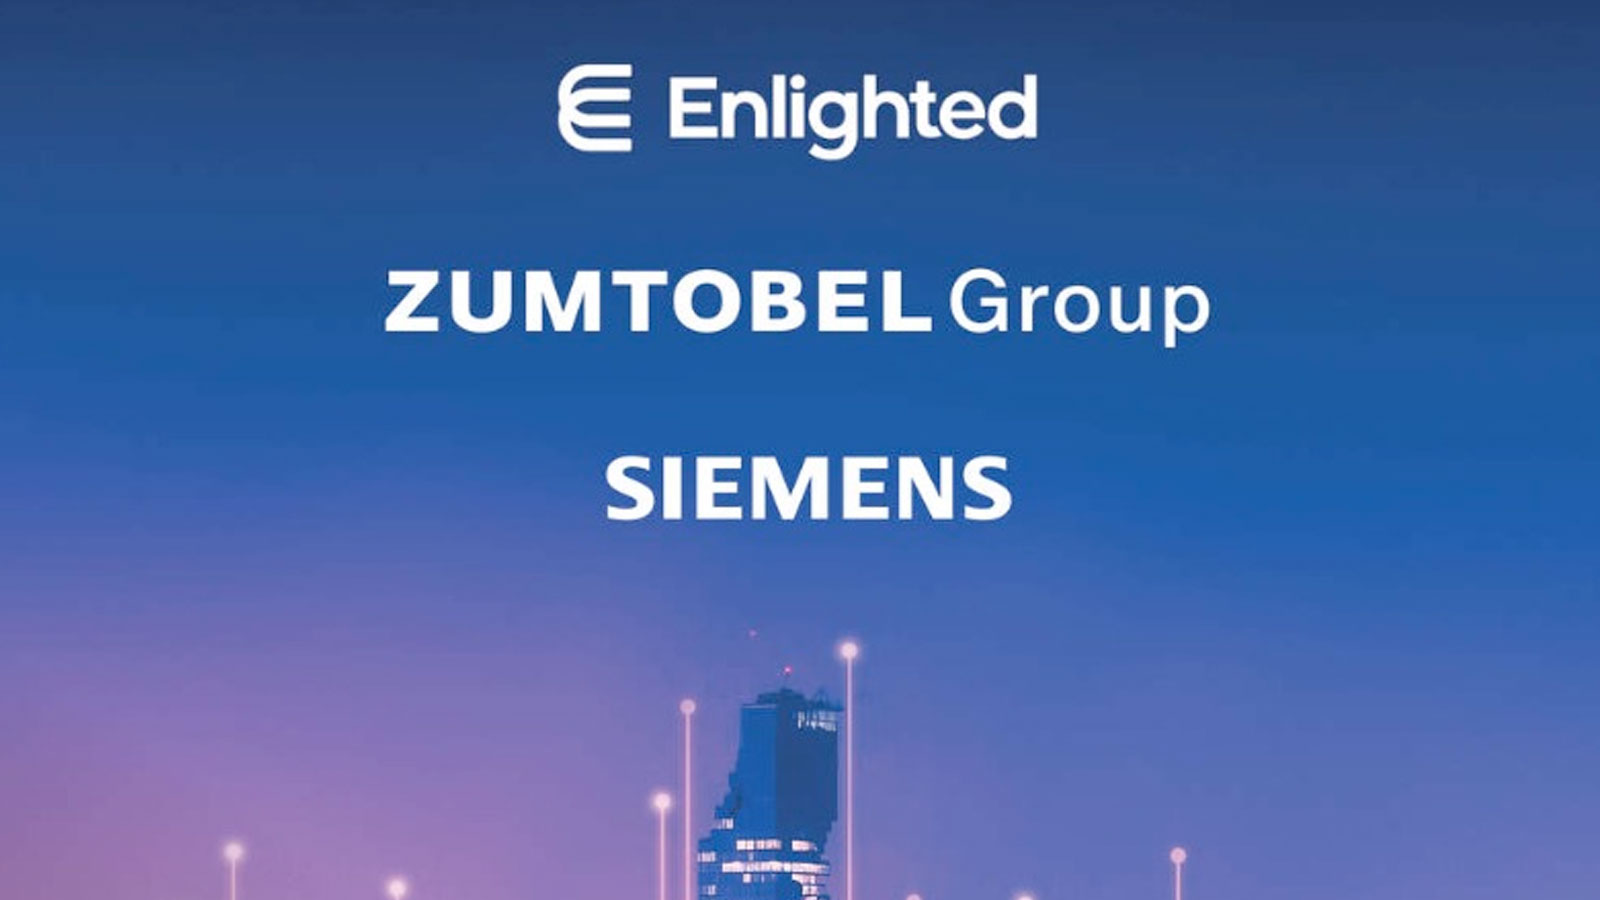 Siemens and its property technology subsidiary, Enlighted, have announced a strategic alliance with Zumtobel Group.